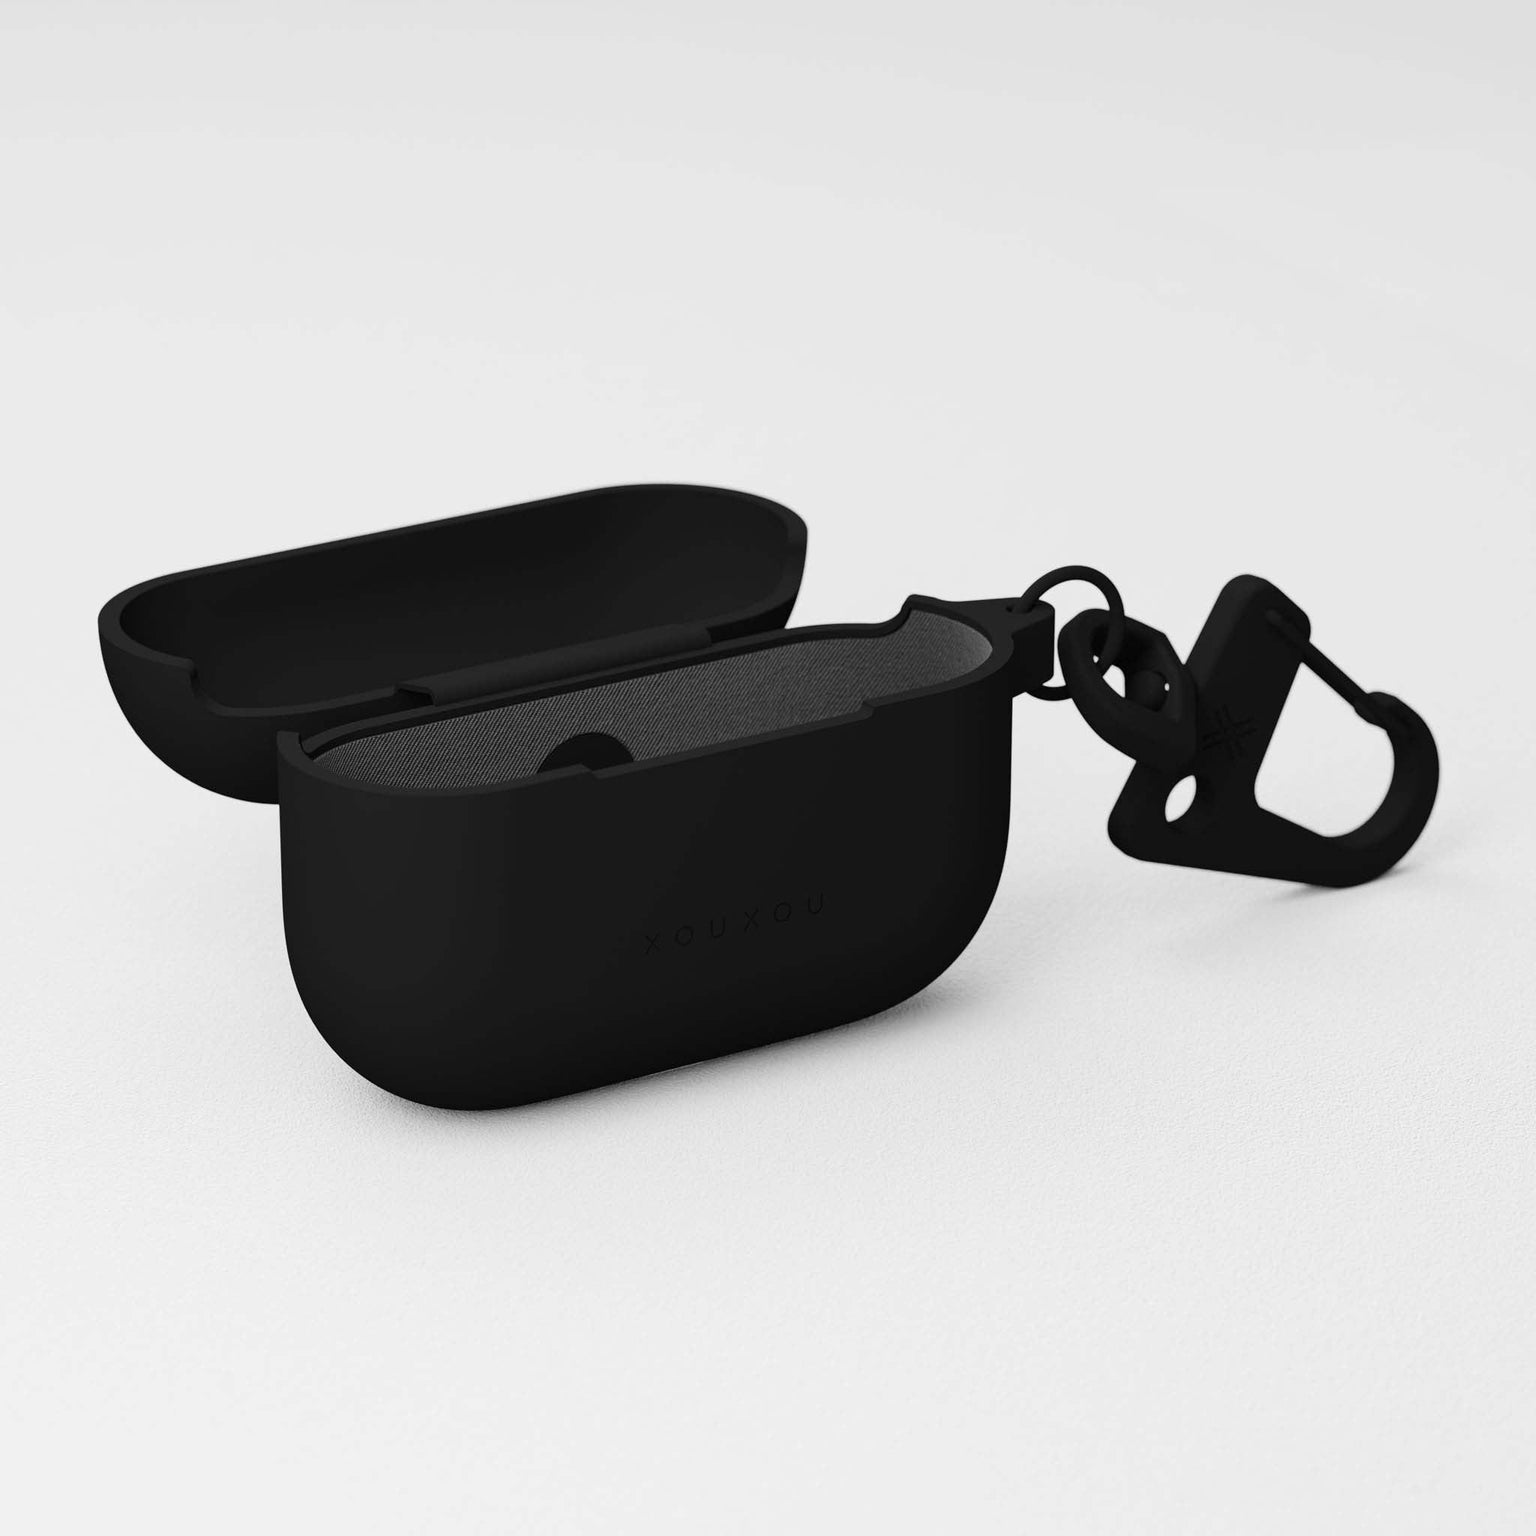 Black Apple Airpods Pro case in silicone with black carabiner hook | XOUXOU